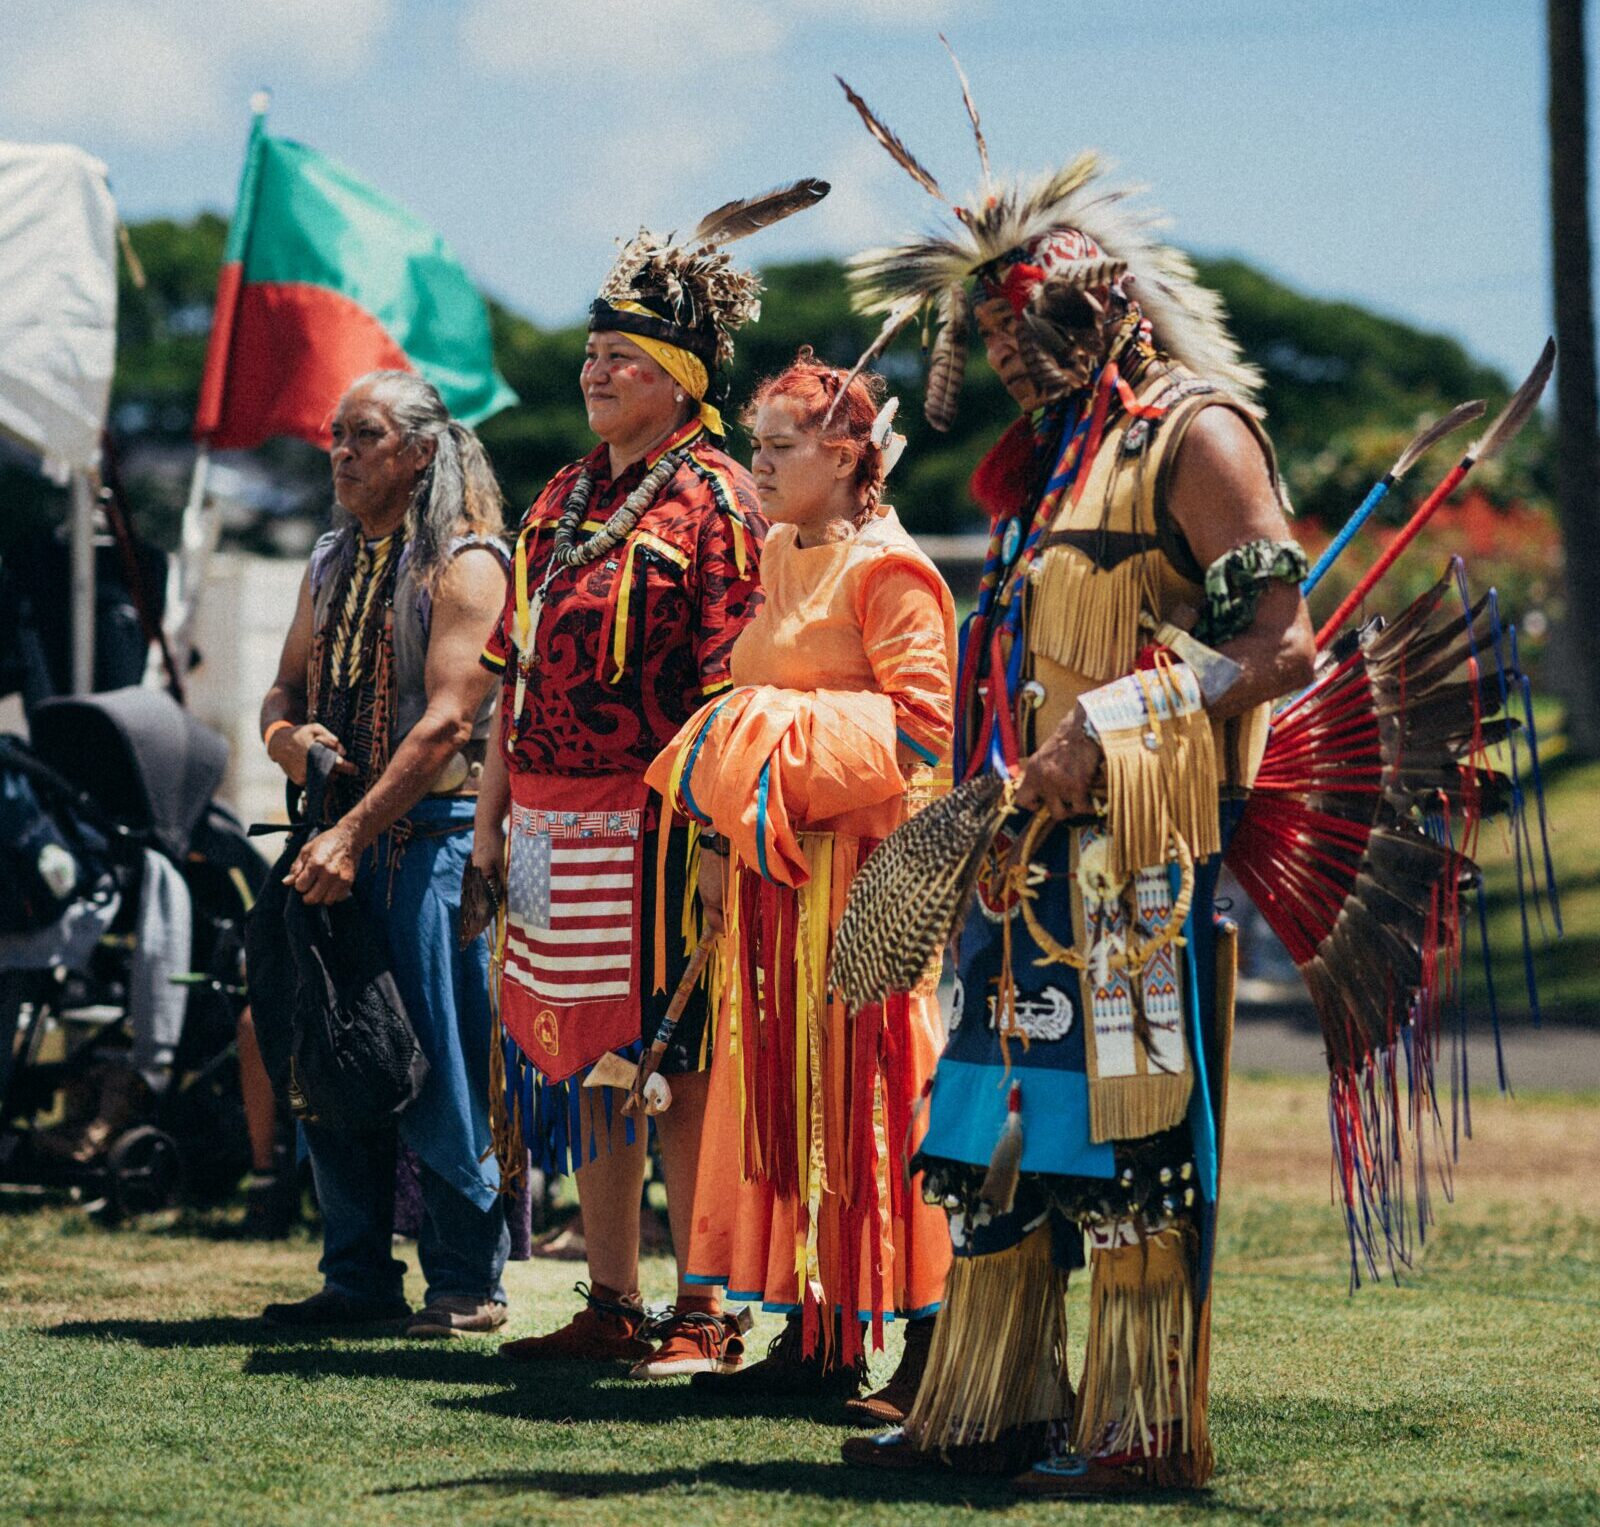 Four Native people wearing traditional Native dress, including headdresses and moccasins, at an outdoor event.